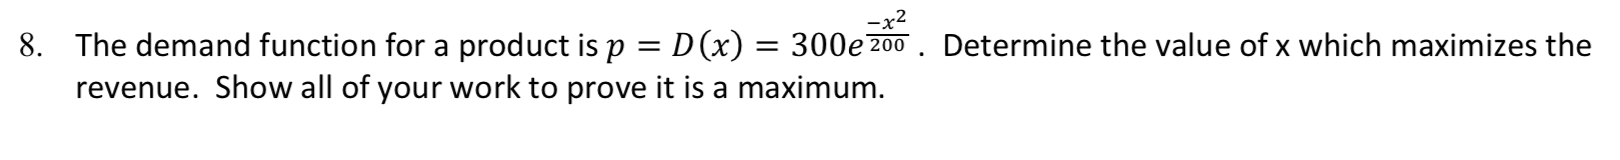 -x2
The demand function for a product is p D(x) = 300e200
revenue. Show all of your work to prove it is a maximum.
Determine the value of x which maximizes the
8.
